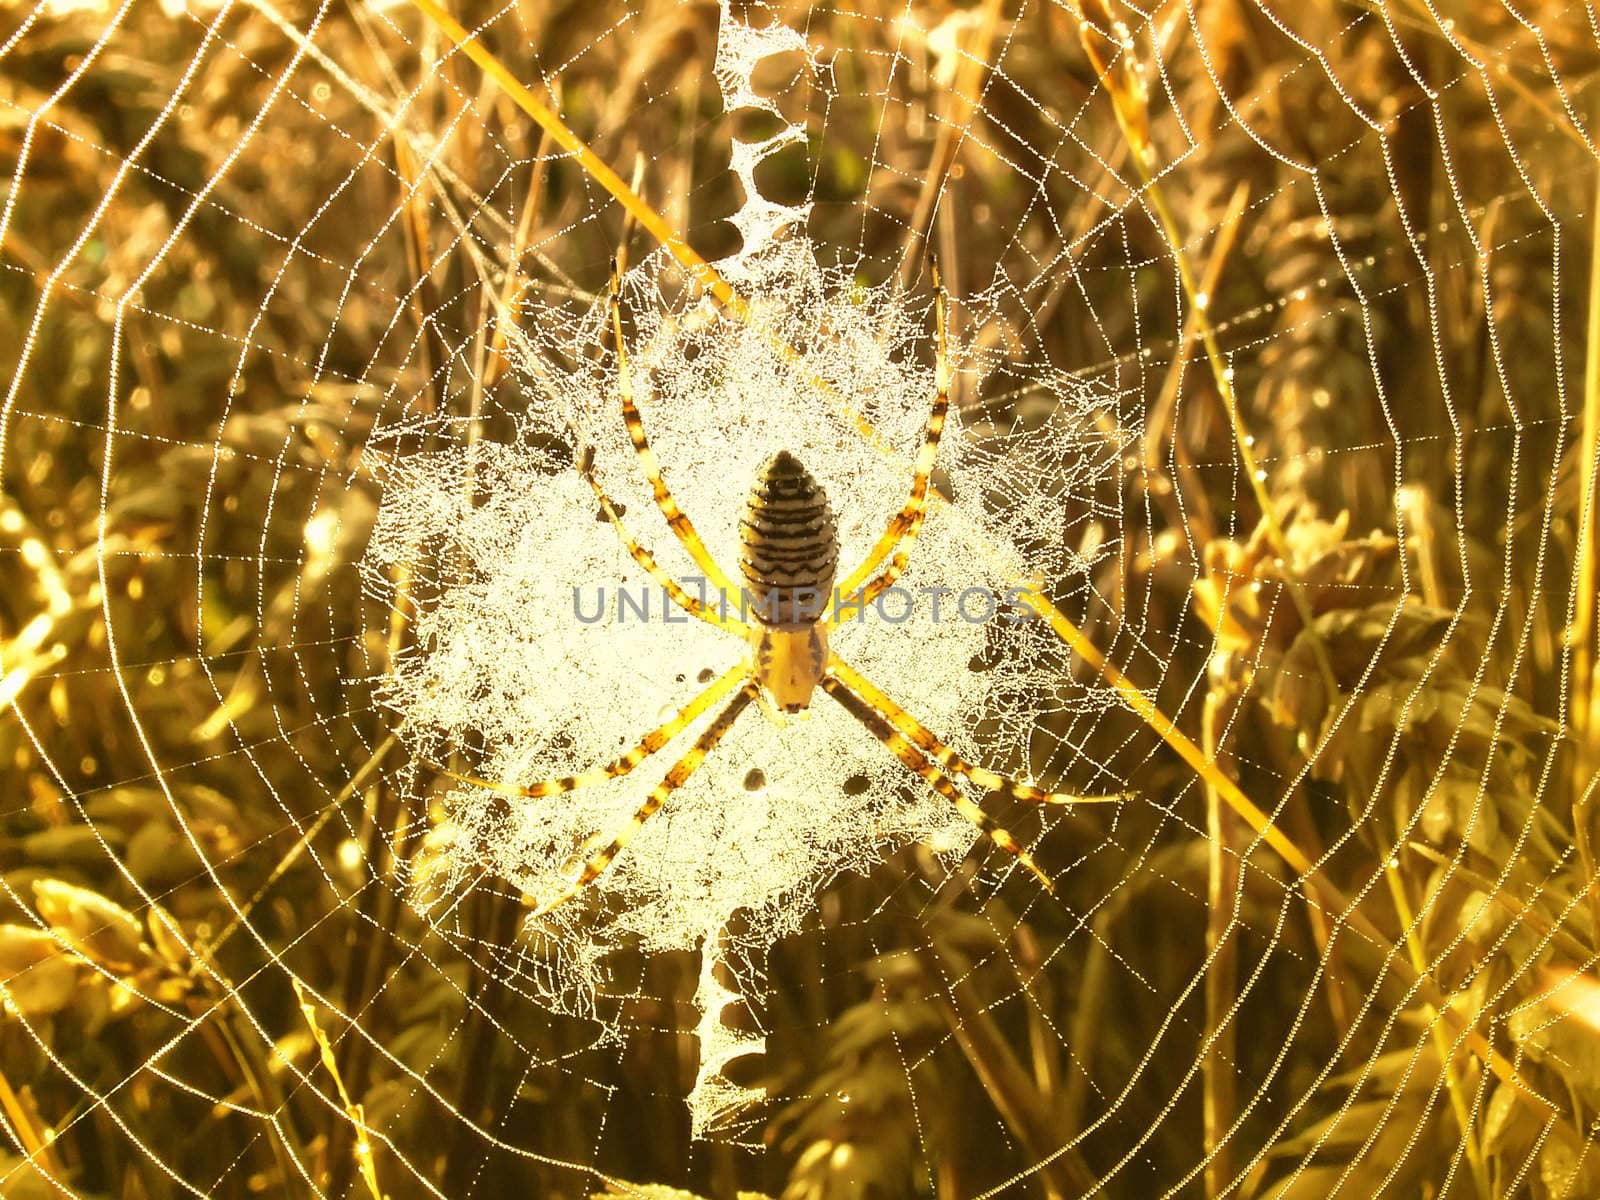 spider in its web in the wheat